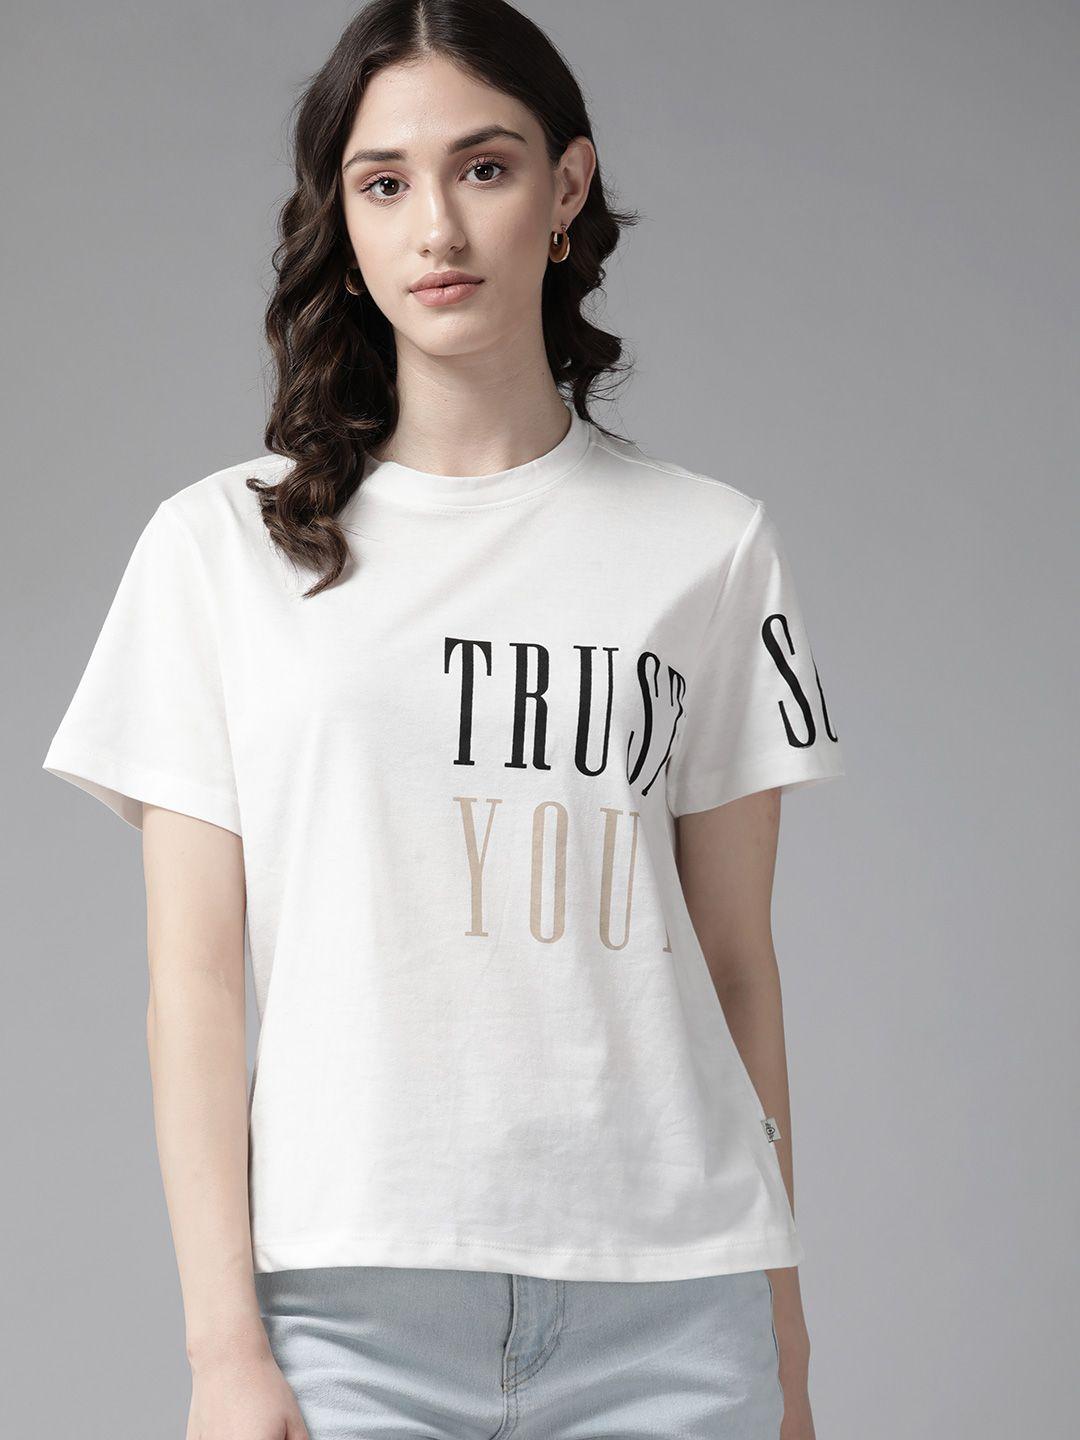 the roadster lifestyle co. typography printed t-shirt